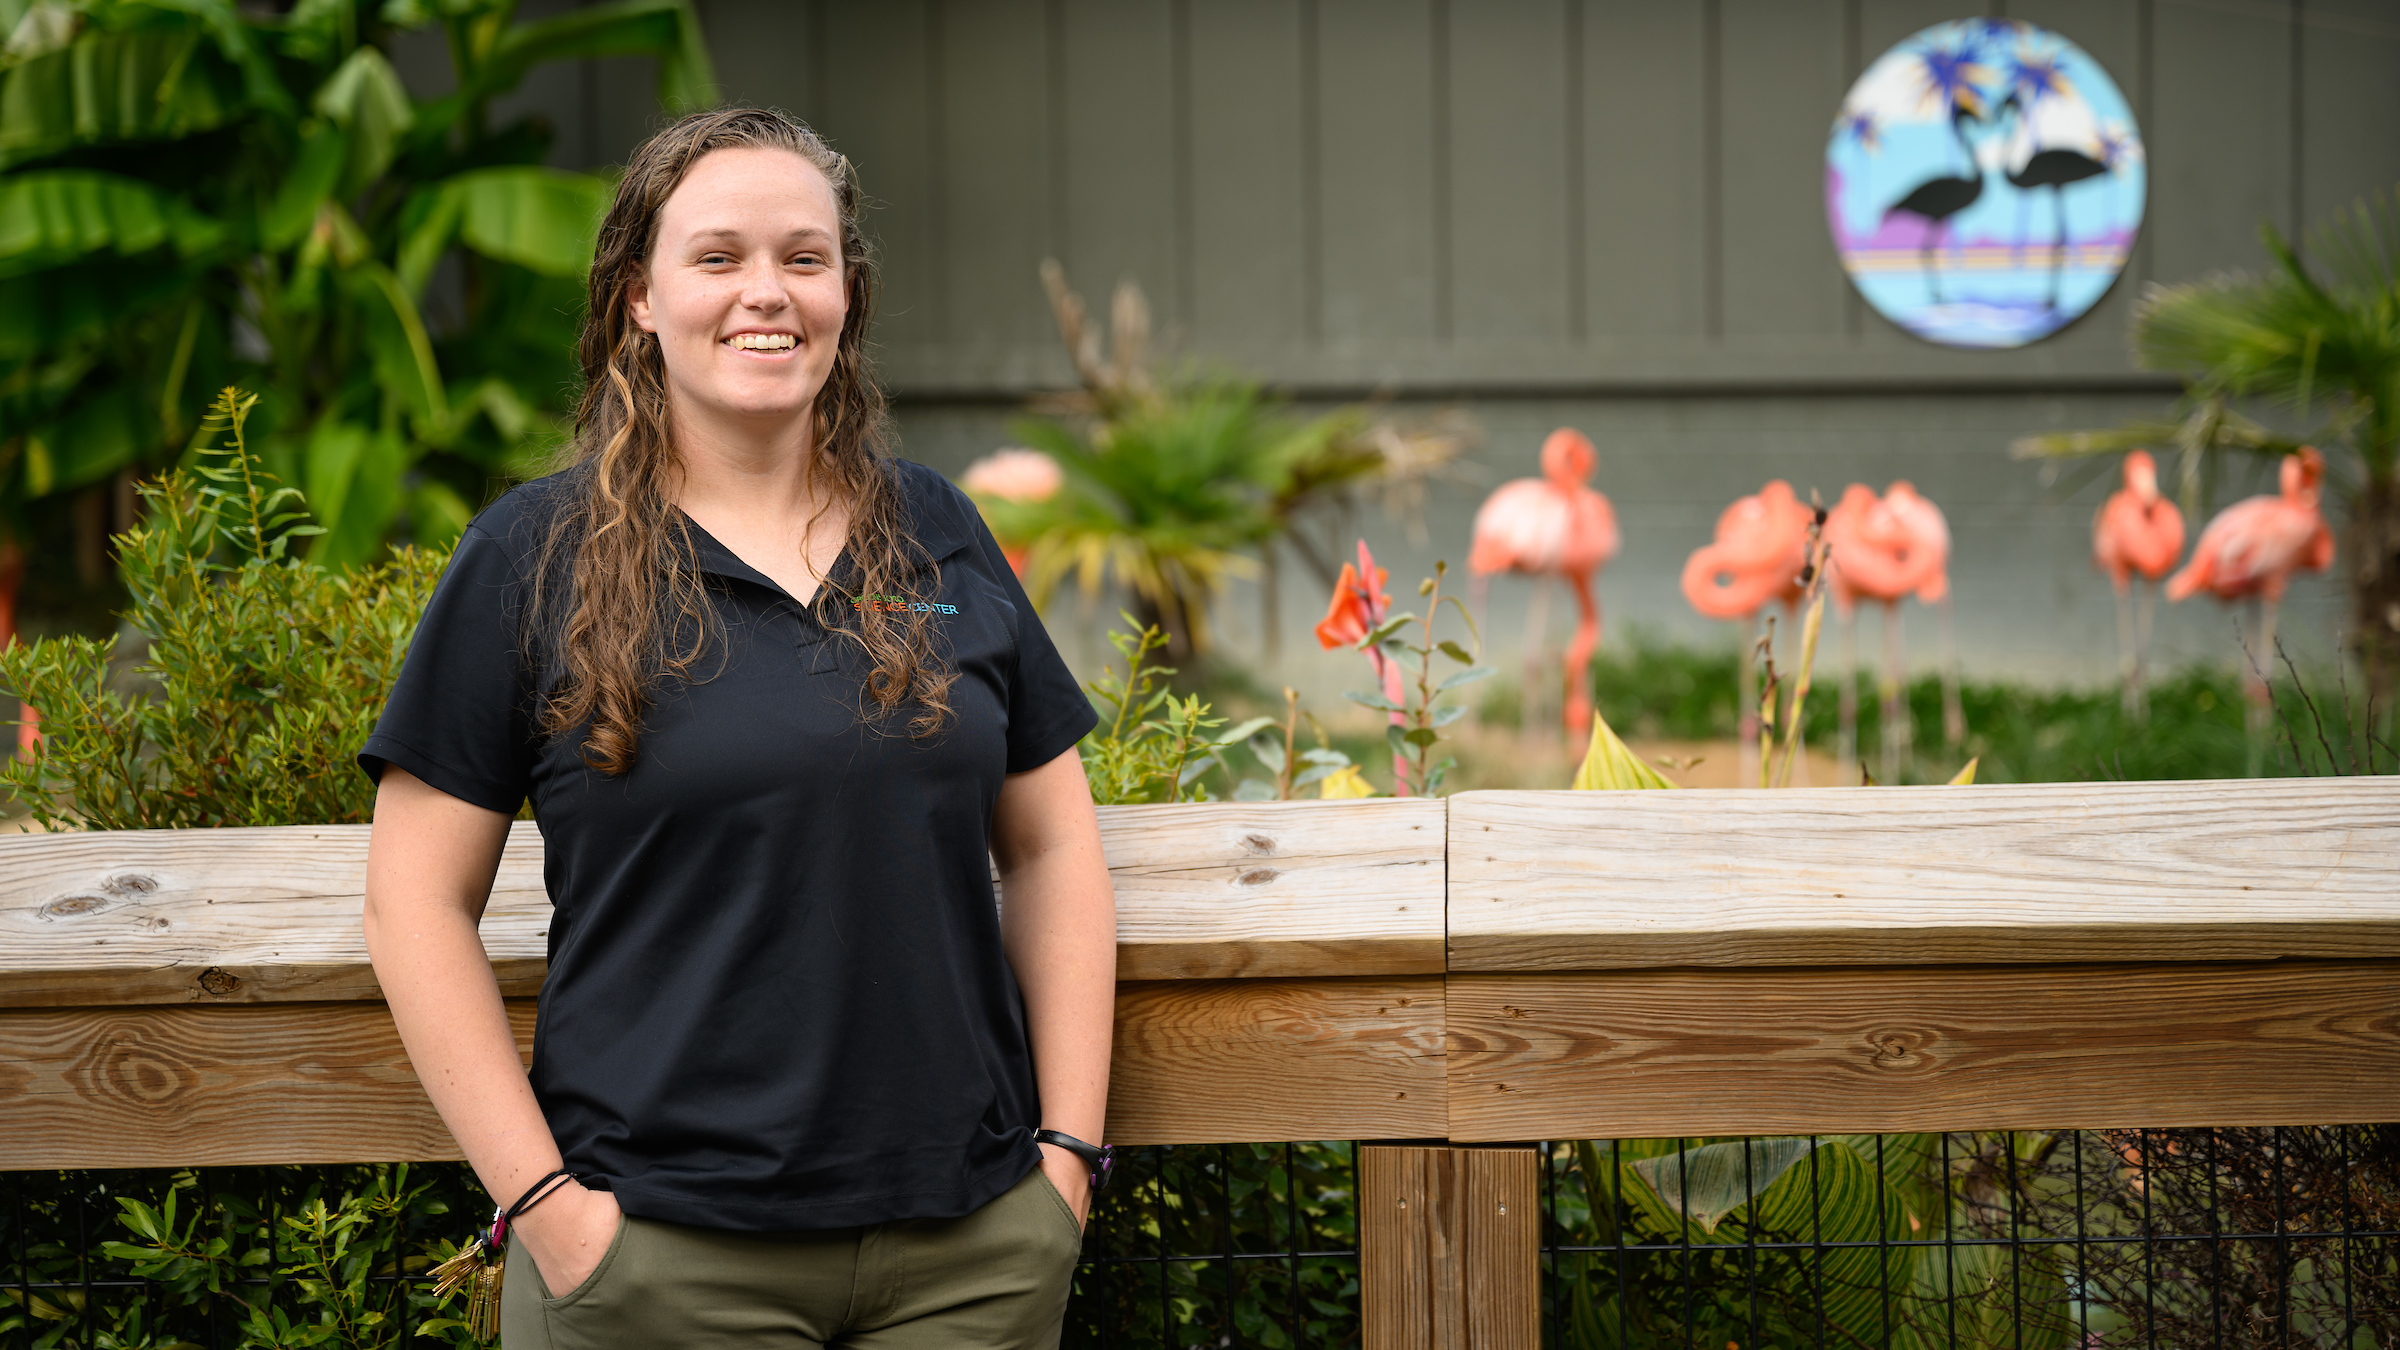 A brunette female veterinarian wearing a black shirt stands in front of a flamingo enclosure at a zoo.